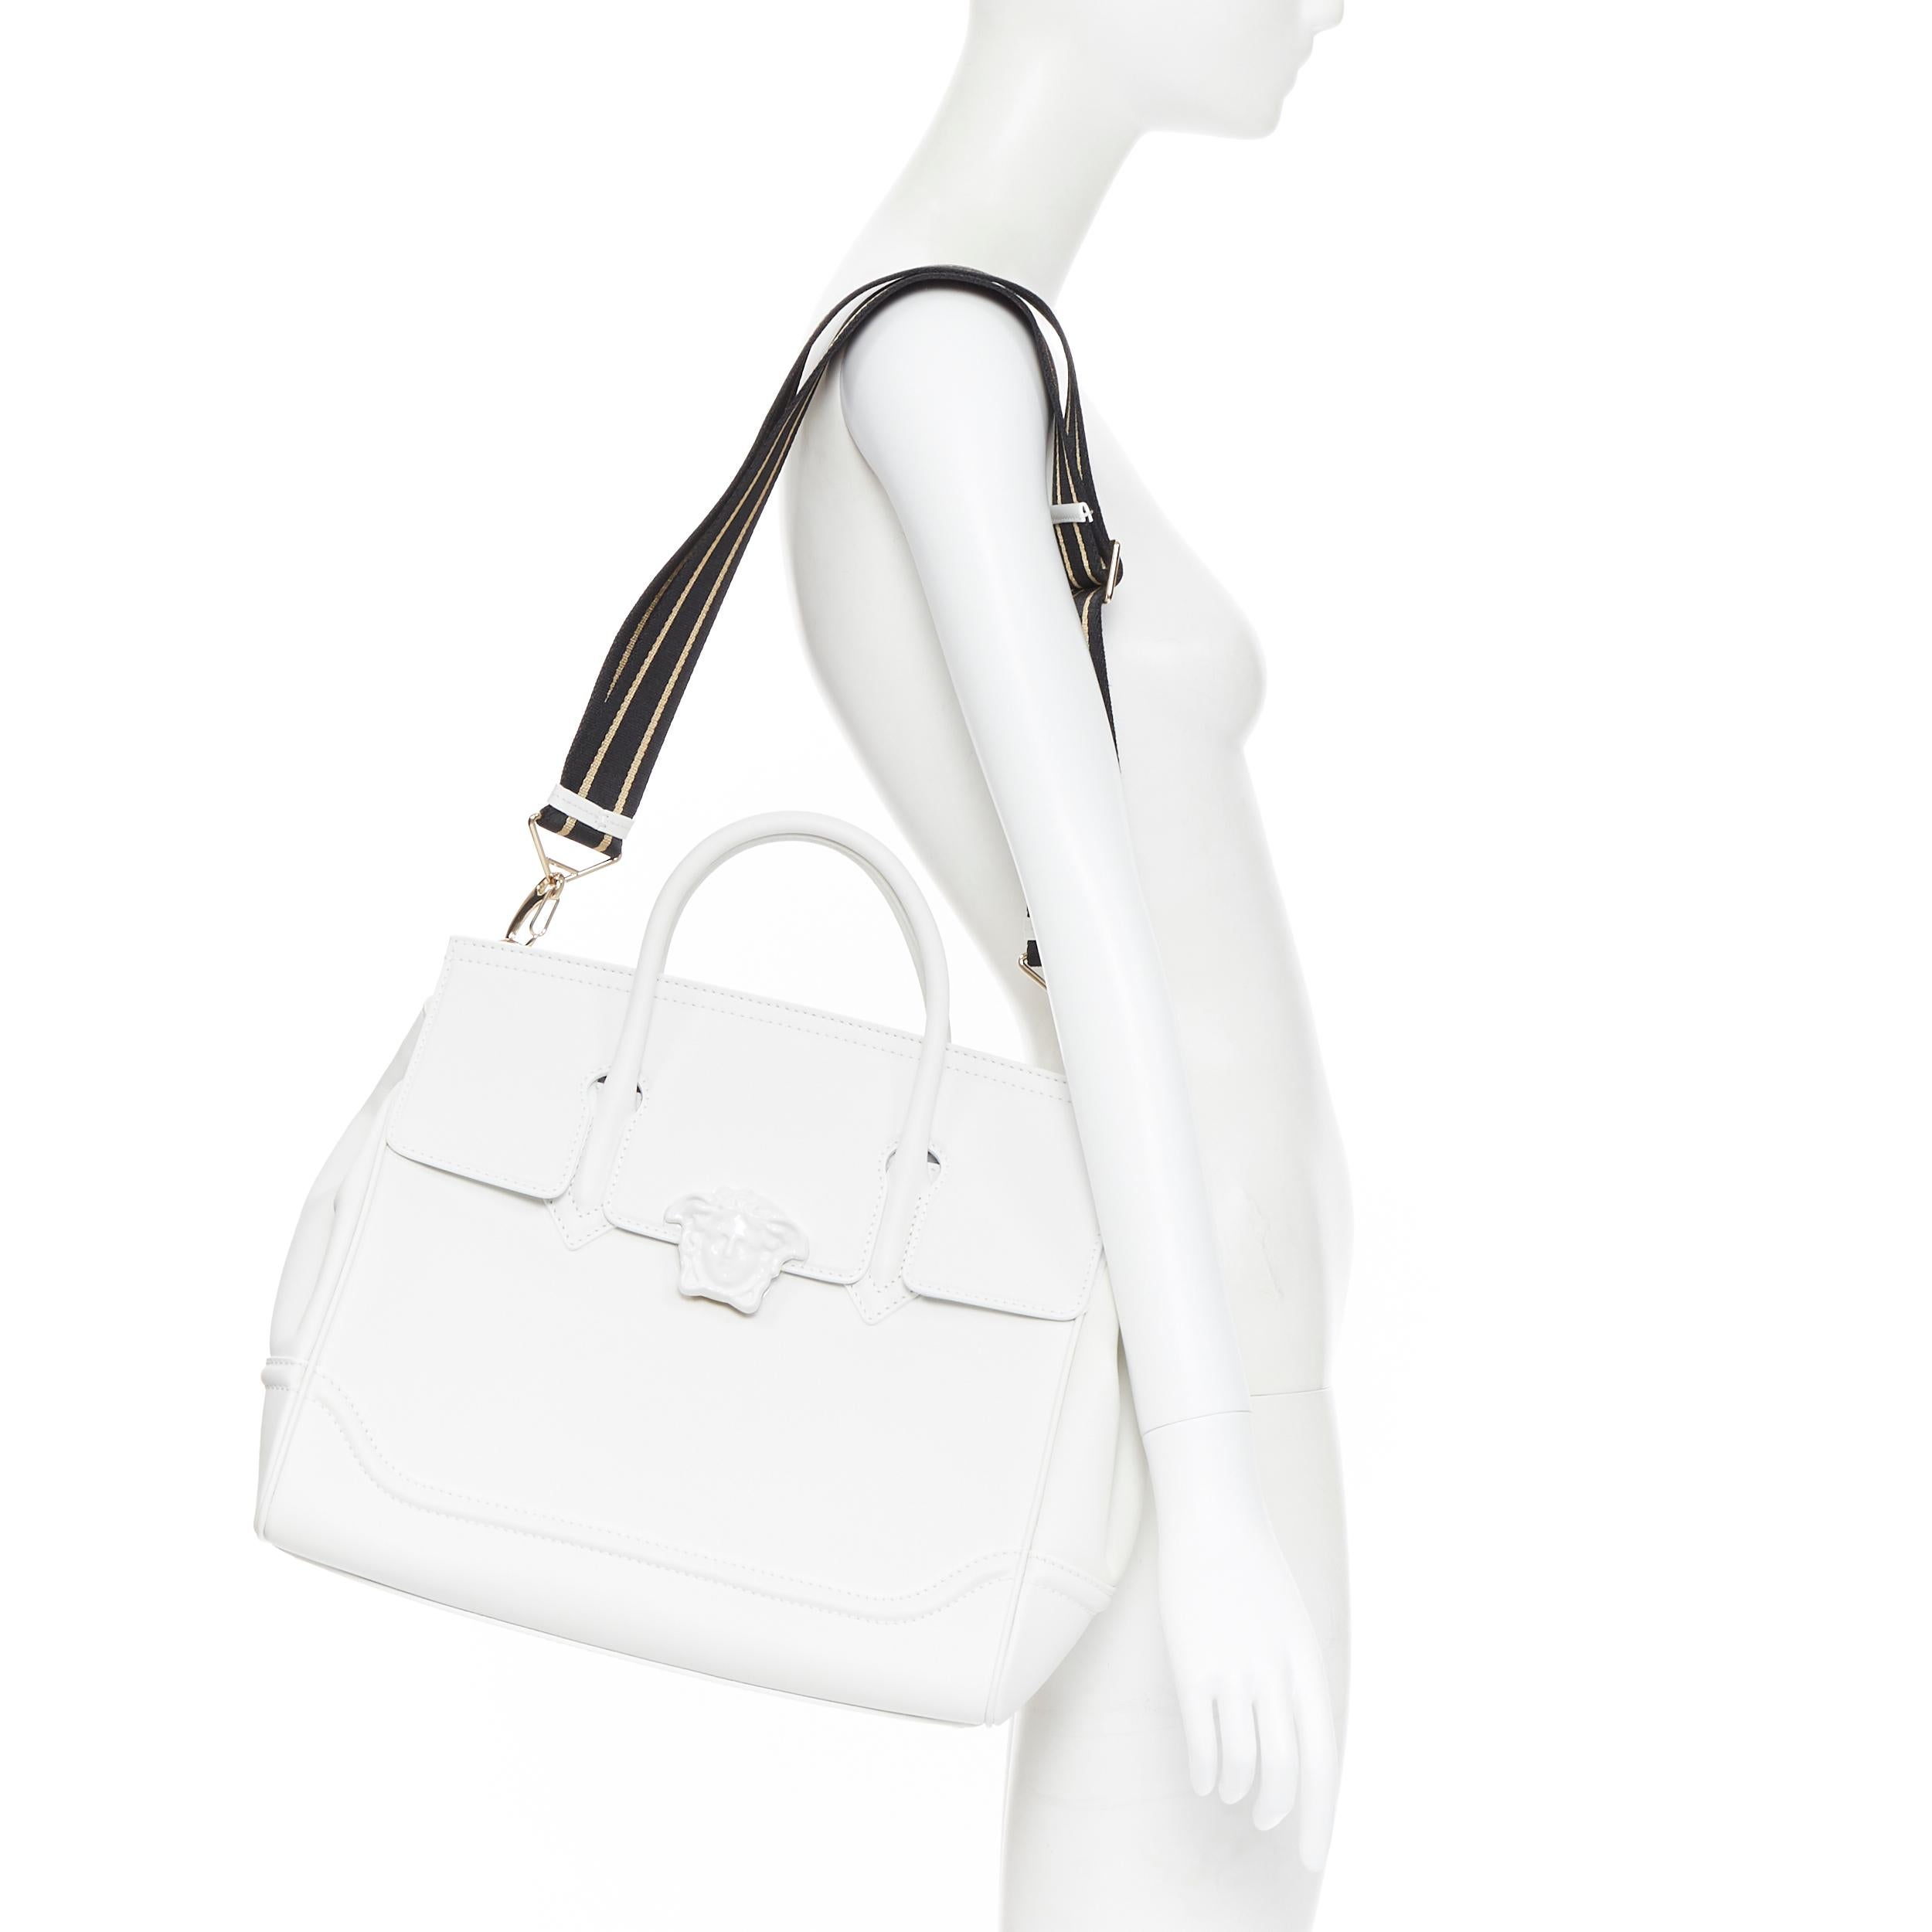 rare VERSACE new Palazzo Empire Large white calf leather Medusa satchel bag 
Brand: Versace
Designer: Donatella Versace
Collection: 2019
Model Name / Style: Palazzo Empire
Material: Leather
Color: White
Pattern: Solid
Closure: Clasp
Lining material: